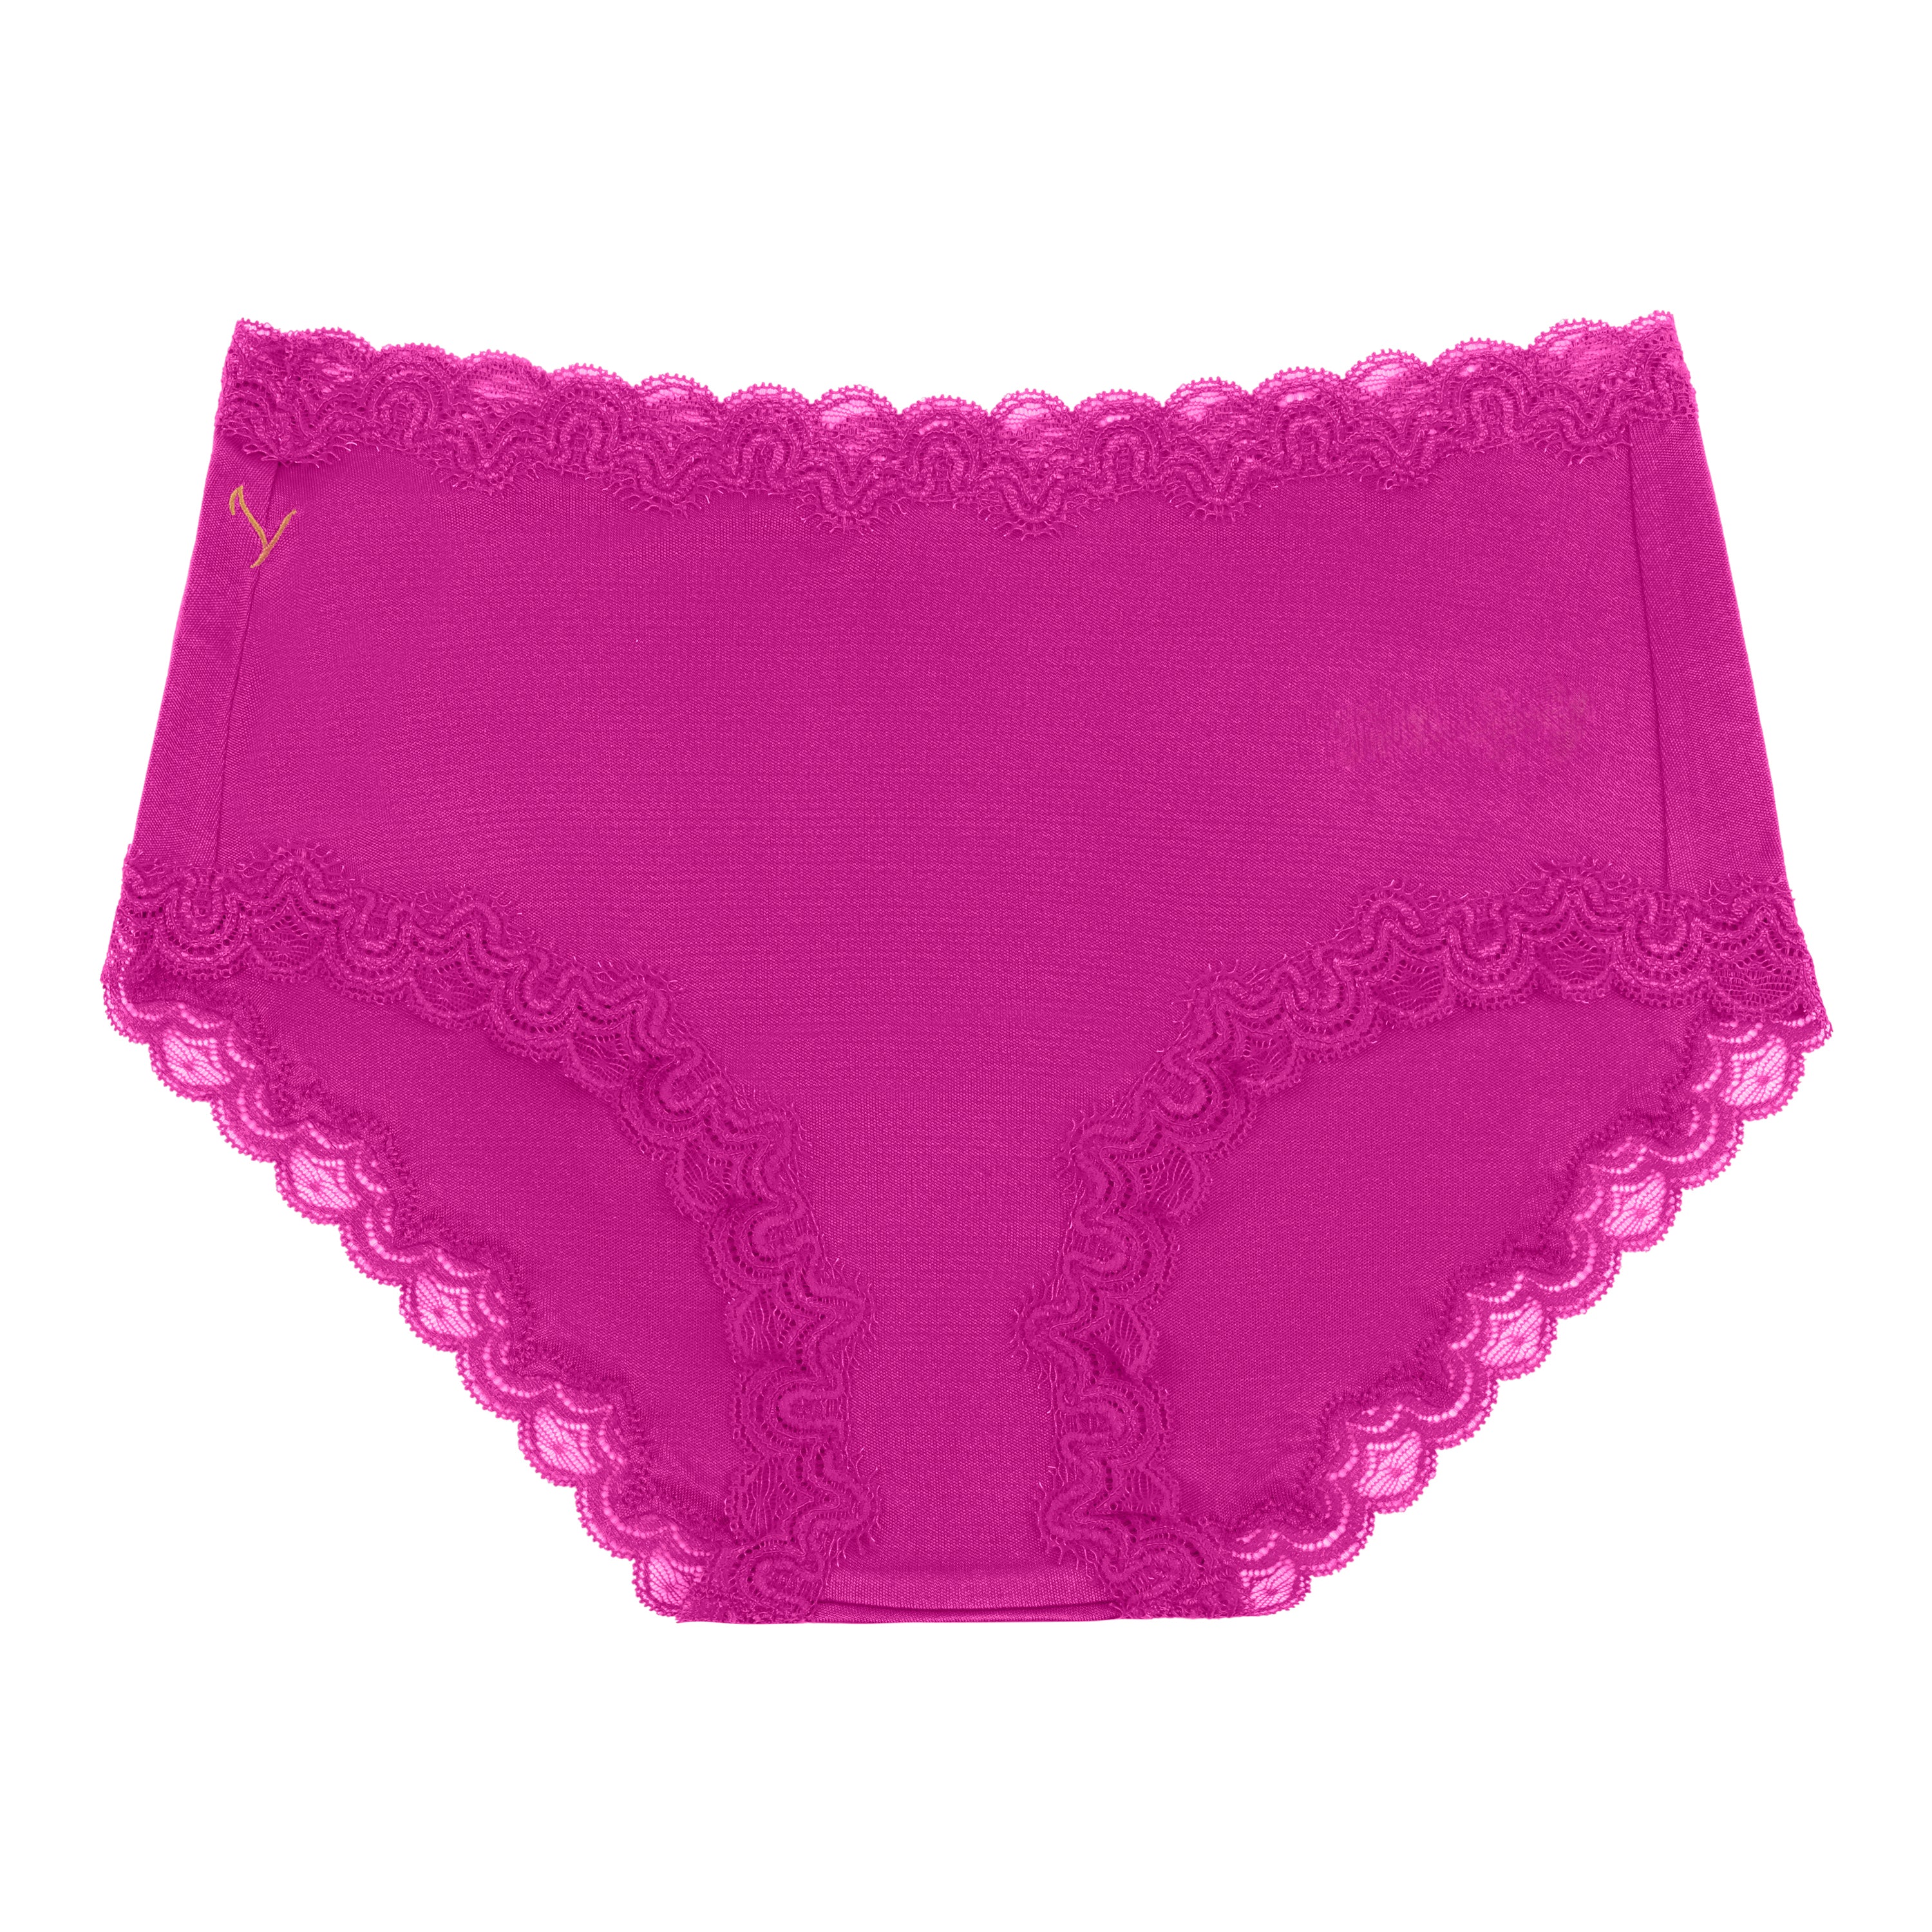 6 Reasons Silk Thongs Deserve a Place in Your Lingerie Drawer – Uwila  Warrior